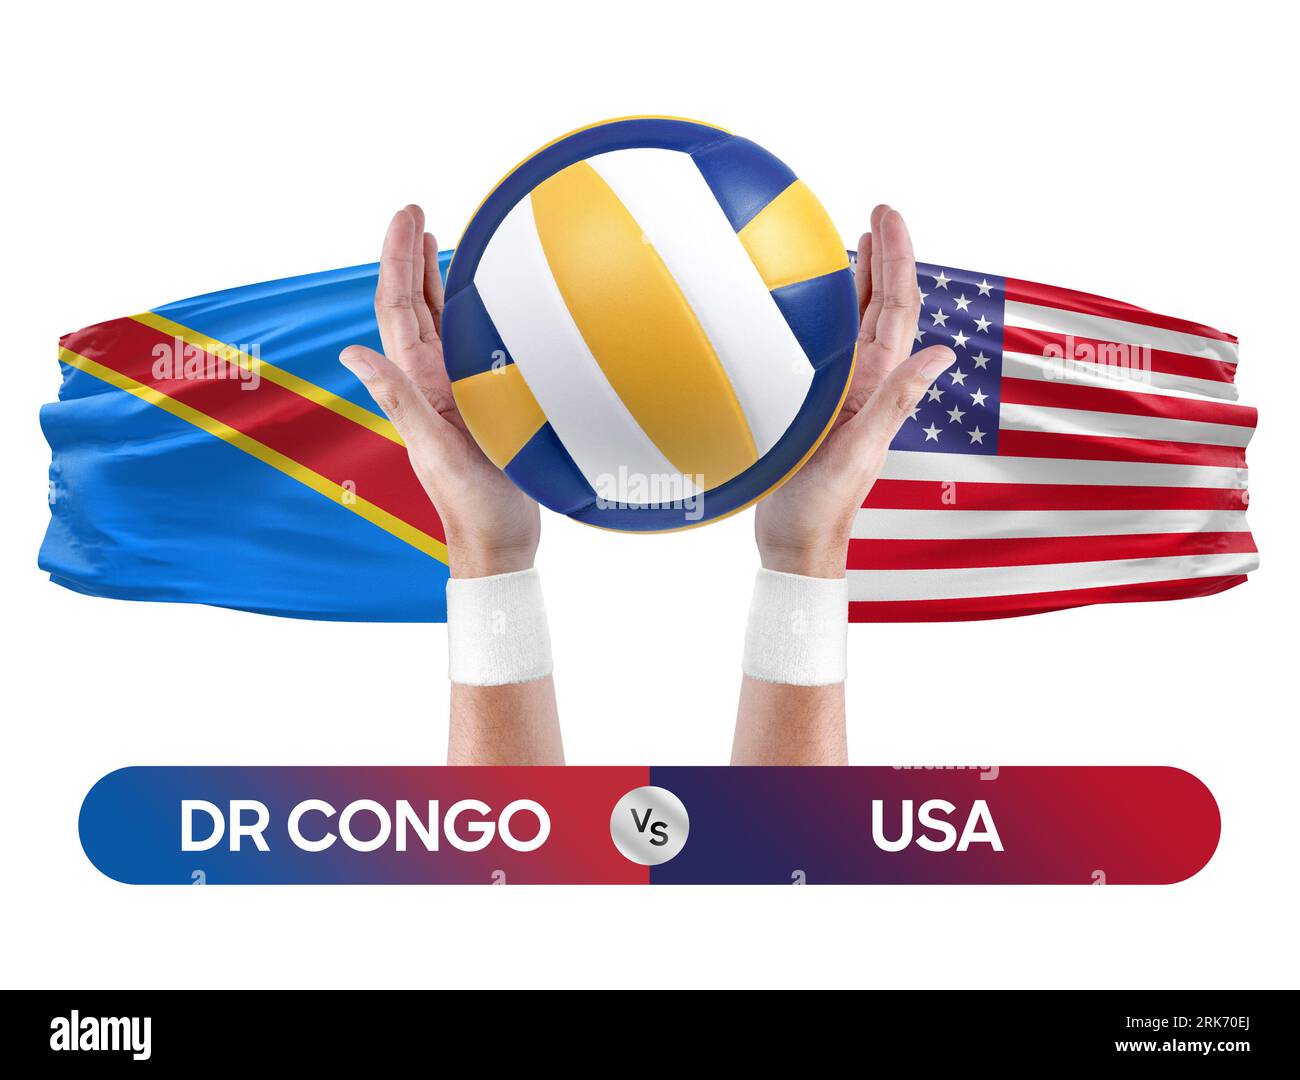 Dr Congo vs USA national teams volleyball volley ball match competition concept. Stock Photo